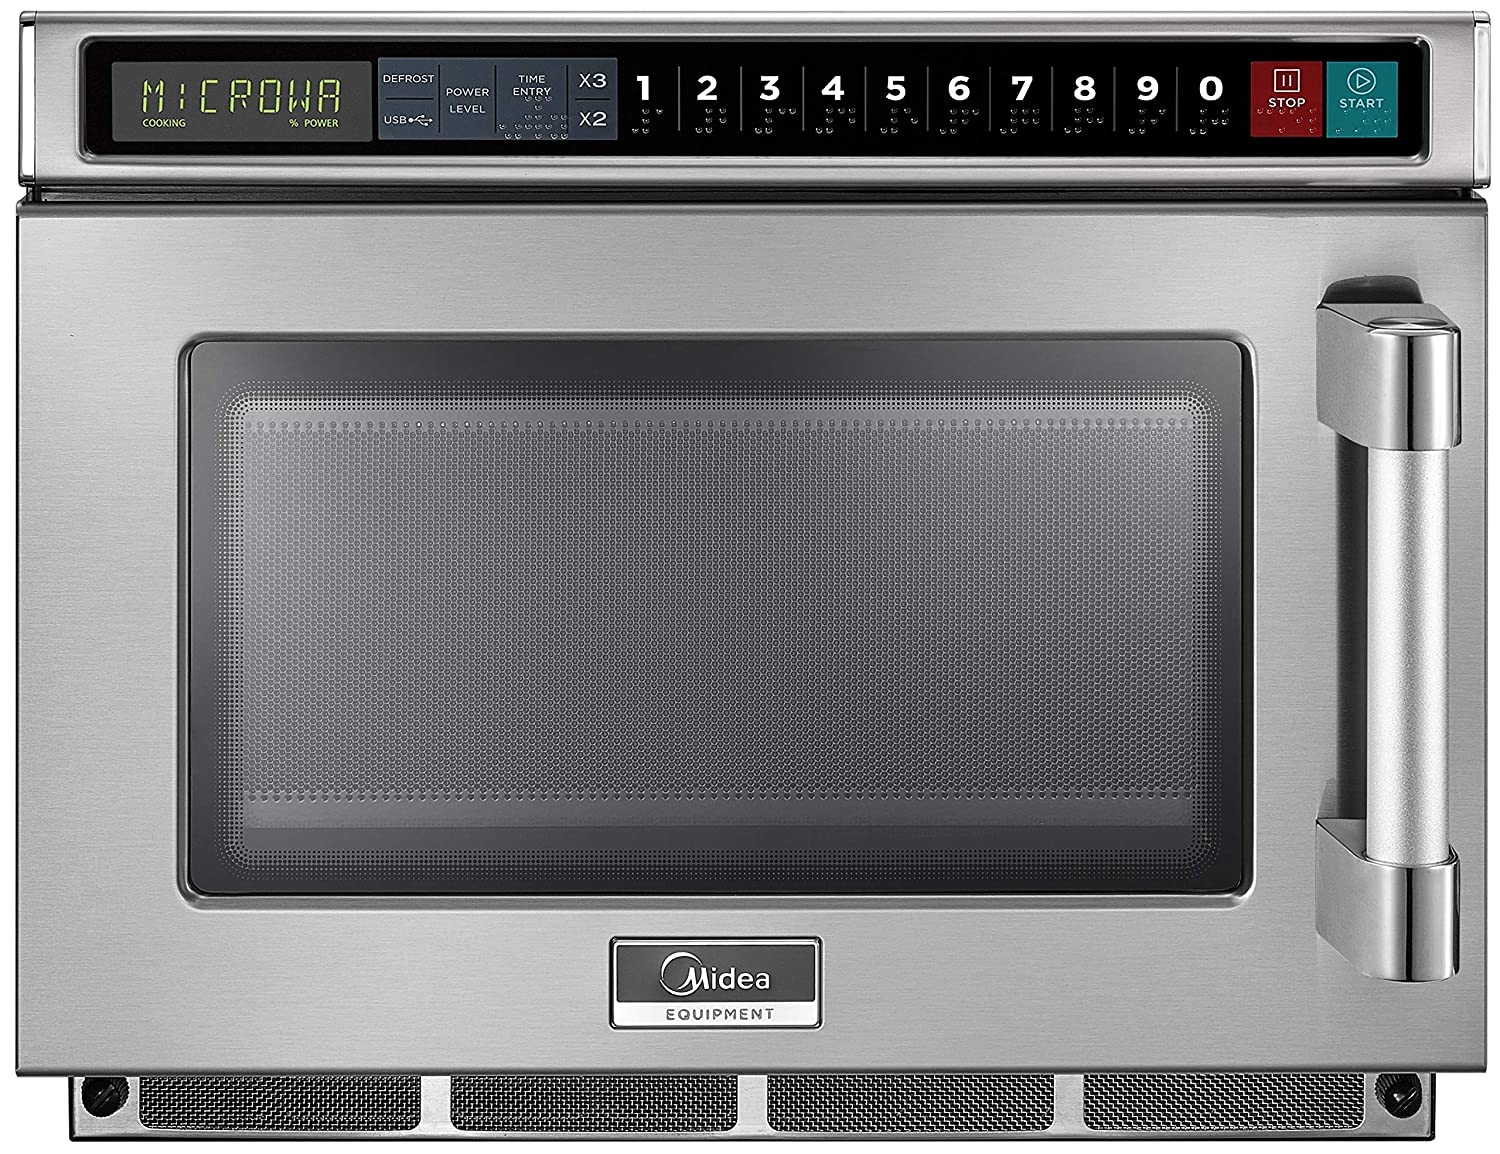 Midea Equipment 1200 Watt Scanning Commercial Microwave Oven, 1200W, Stainless Steel (1217G1S) Import To Shop ×Product